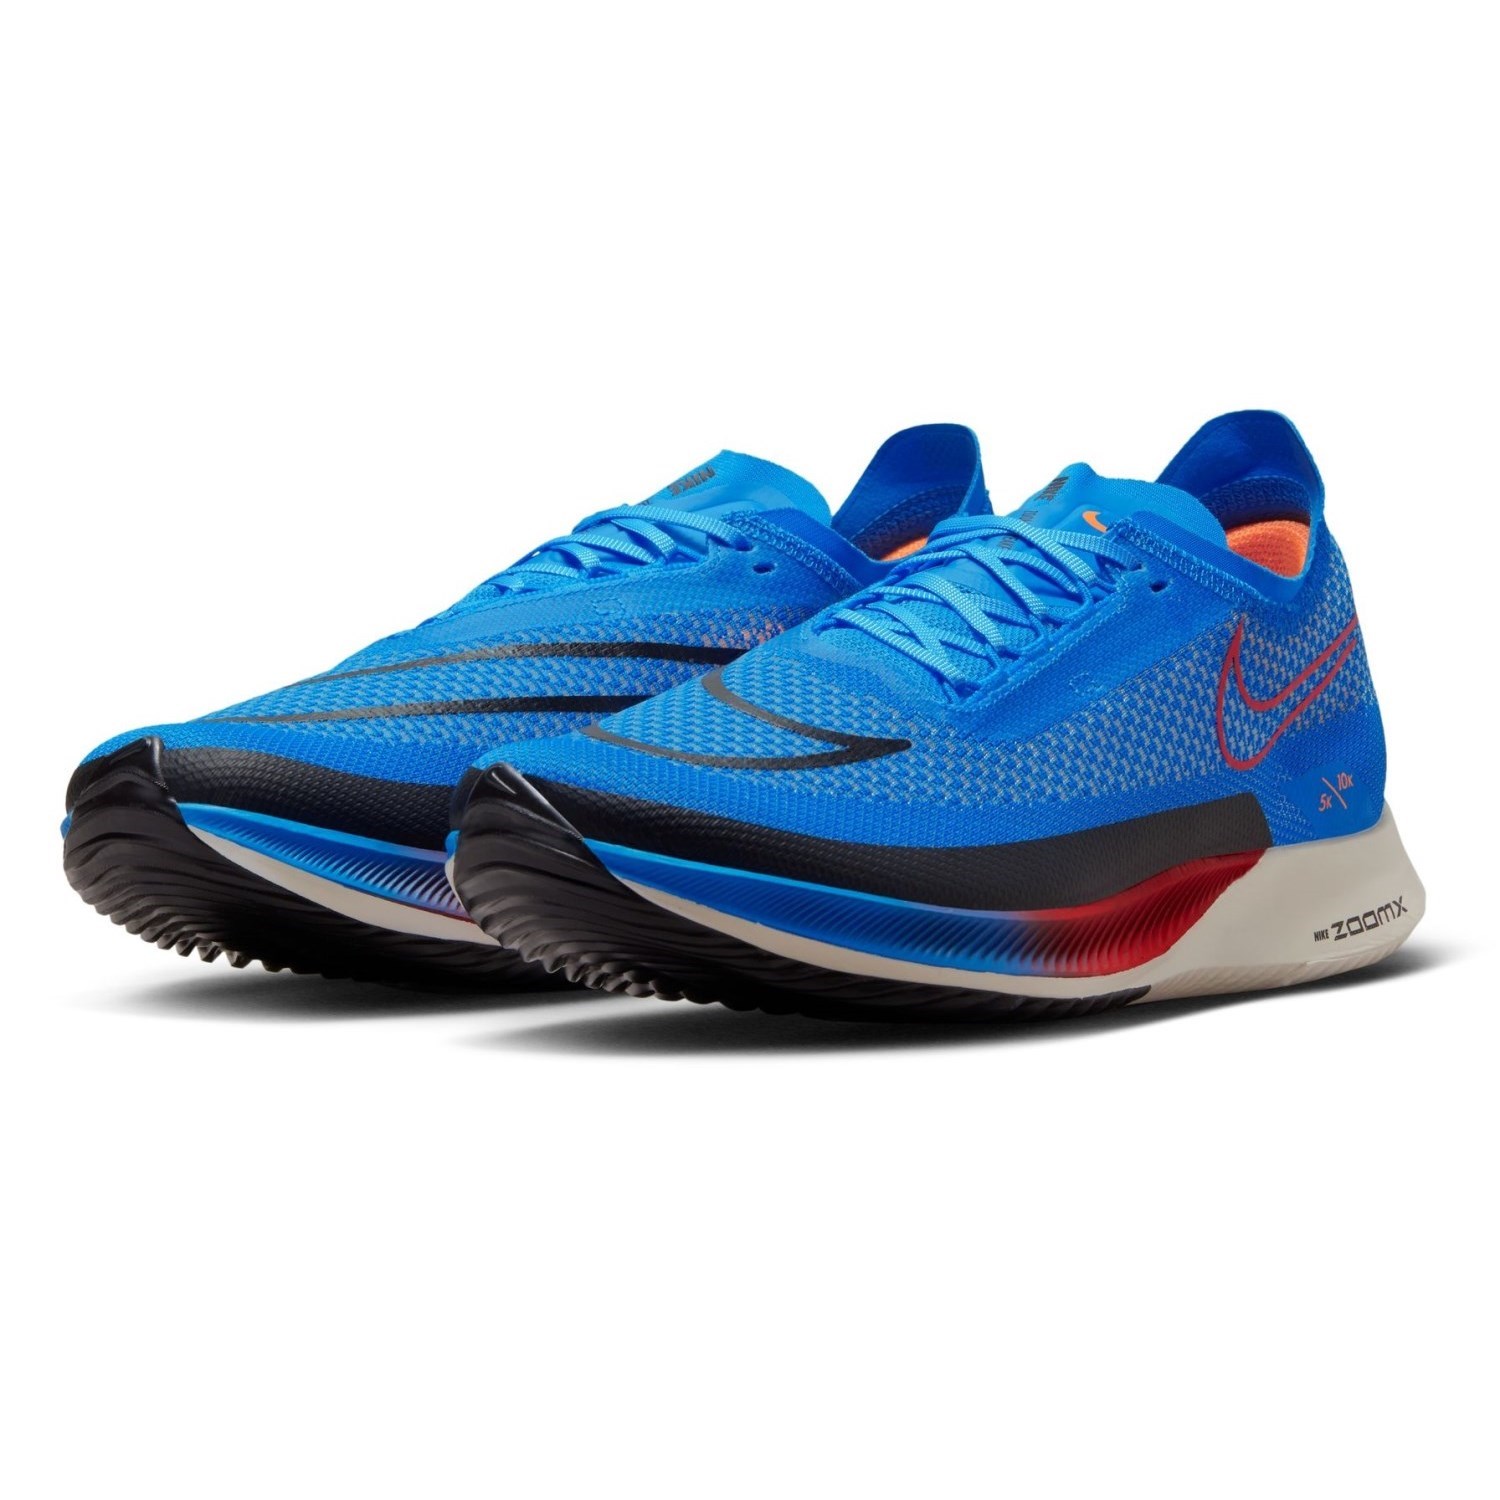 Nike ZoomX Streakfly - Mens Road Racing Shoes - Photo Blue/University ...